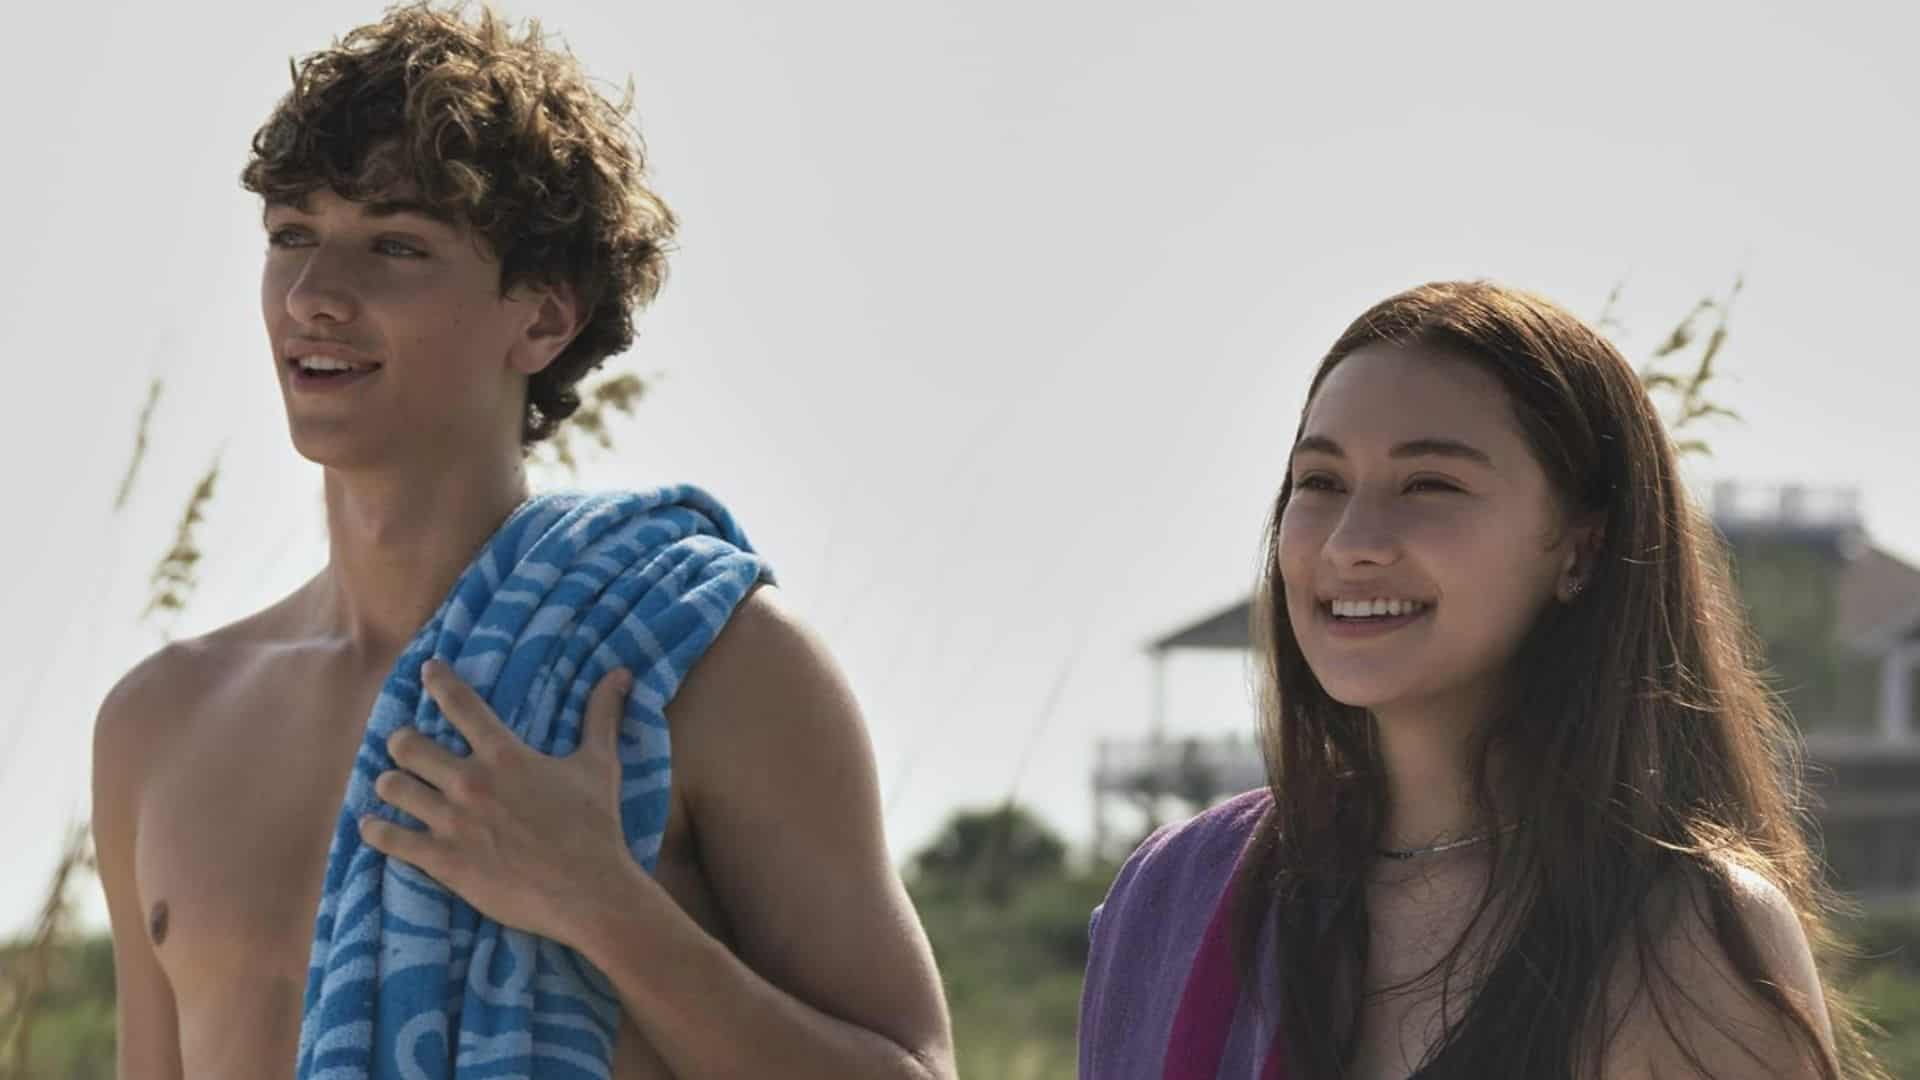 Gavin Casalegno and Lola Tung with beach towels over their shoulders in this image from Amazon Studios